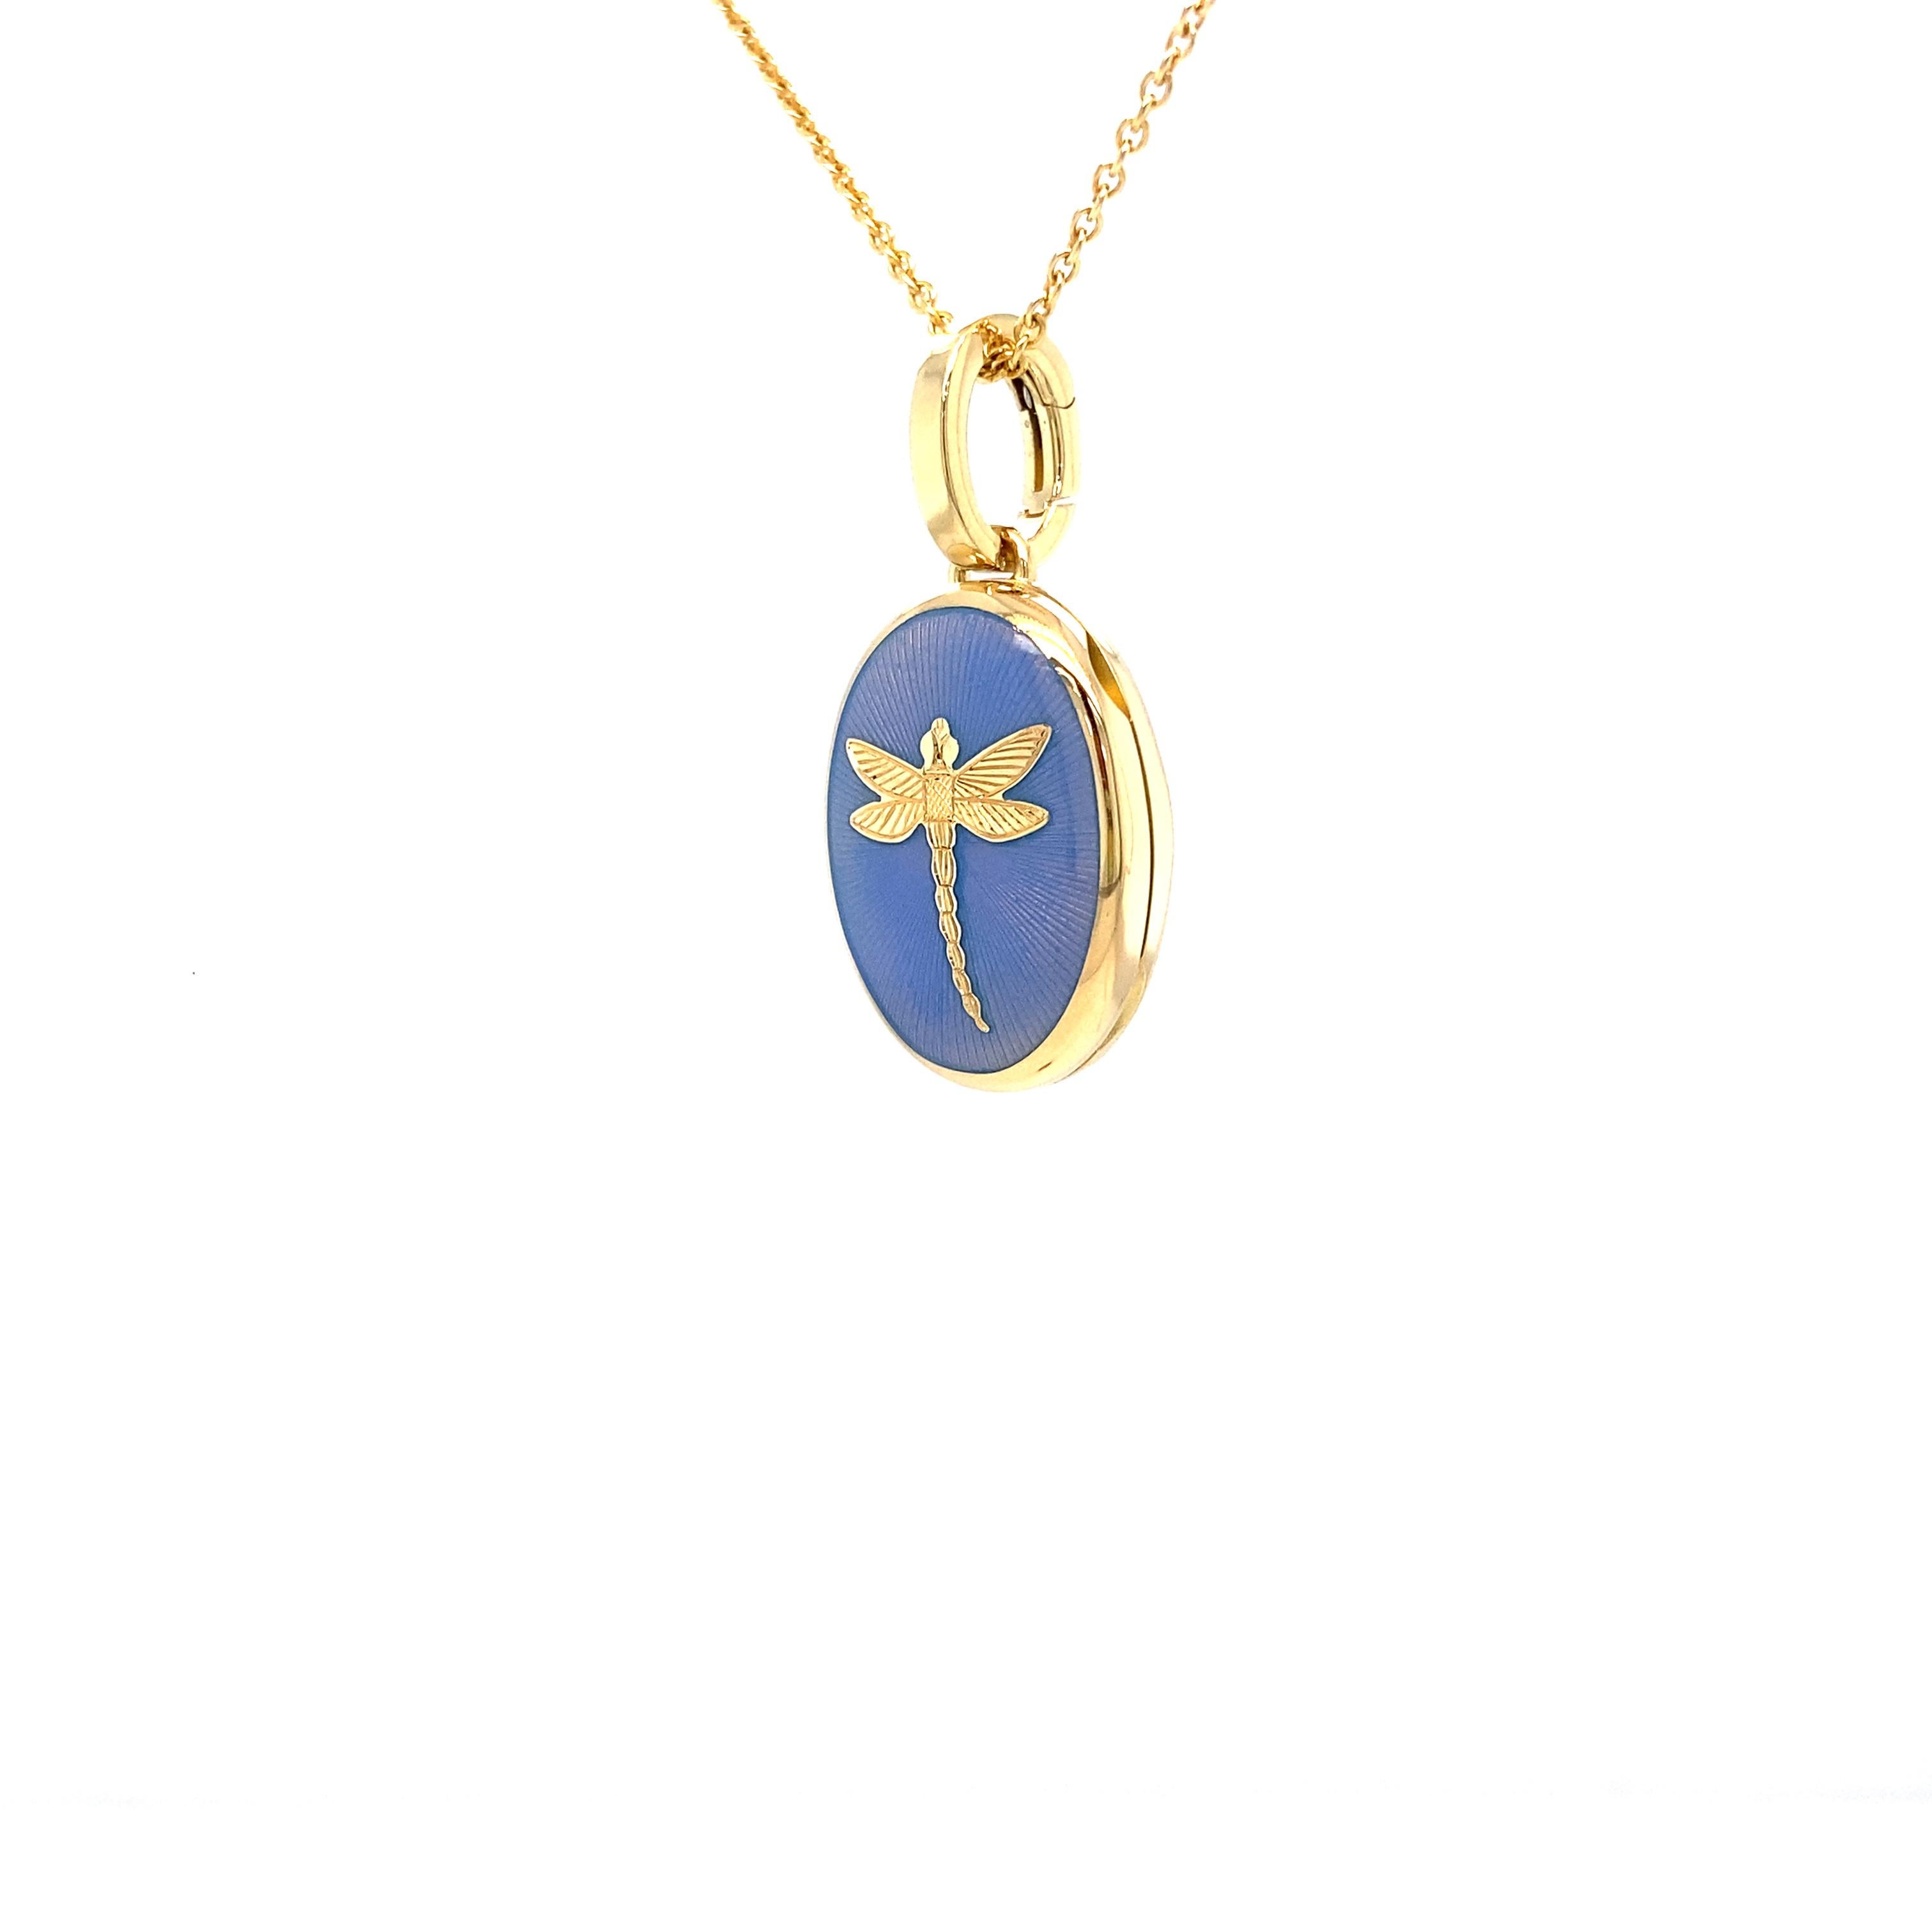 Victor Mayer customizable oval locket pendant with dragonfly 18k yellow gold, Hallmark collection, translucent opalescent blue vitreous enamel, guilloche, measurements app. 15.0 mm x 20.0 mm

About the creator Victor Mayer
Victor Mayer is